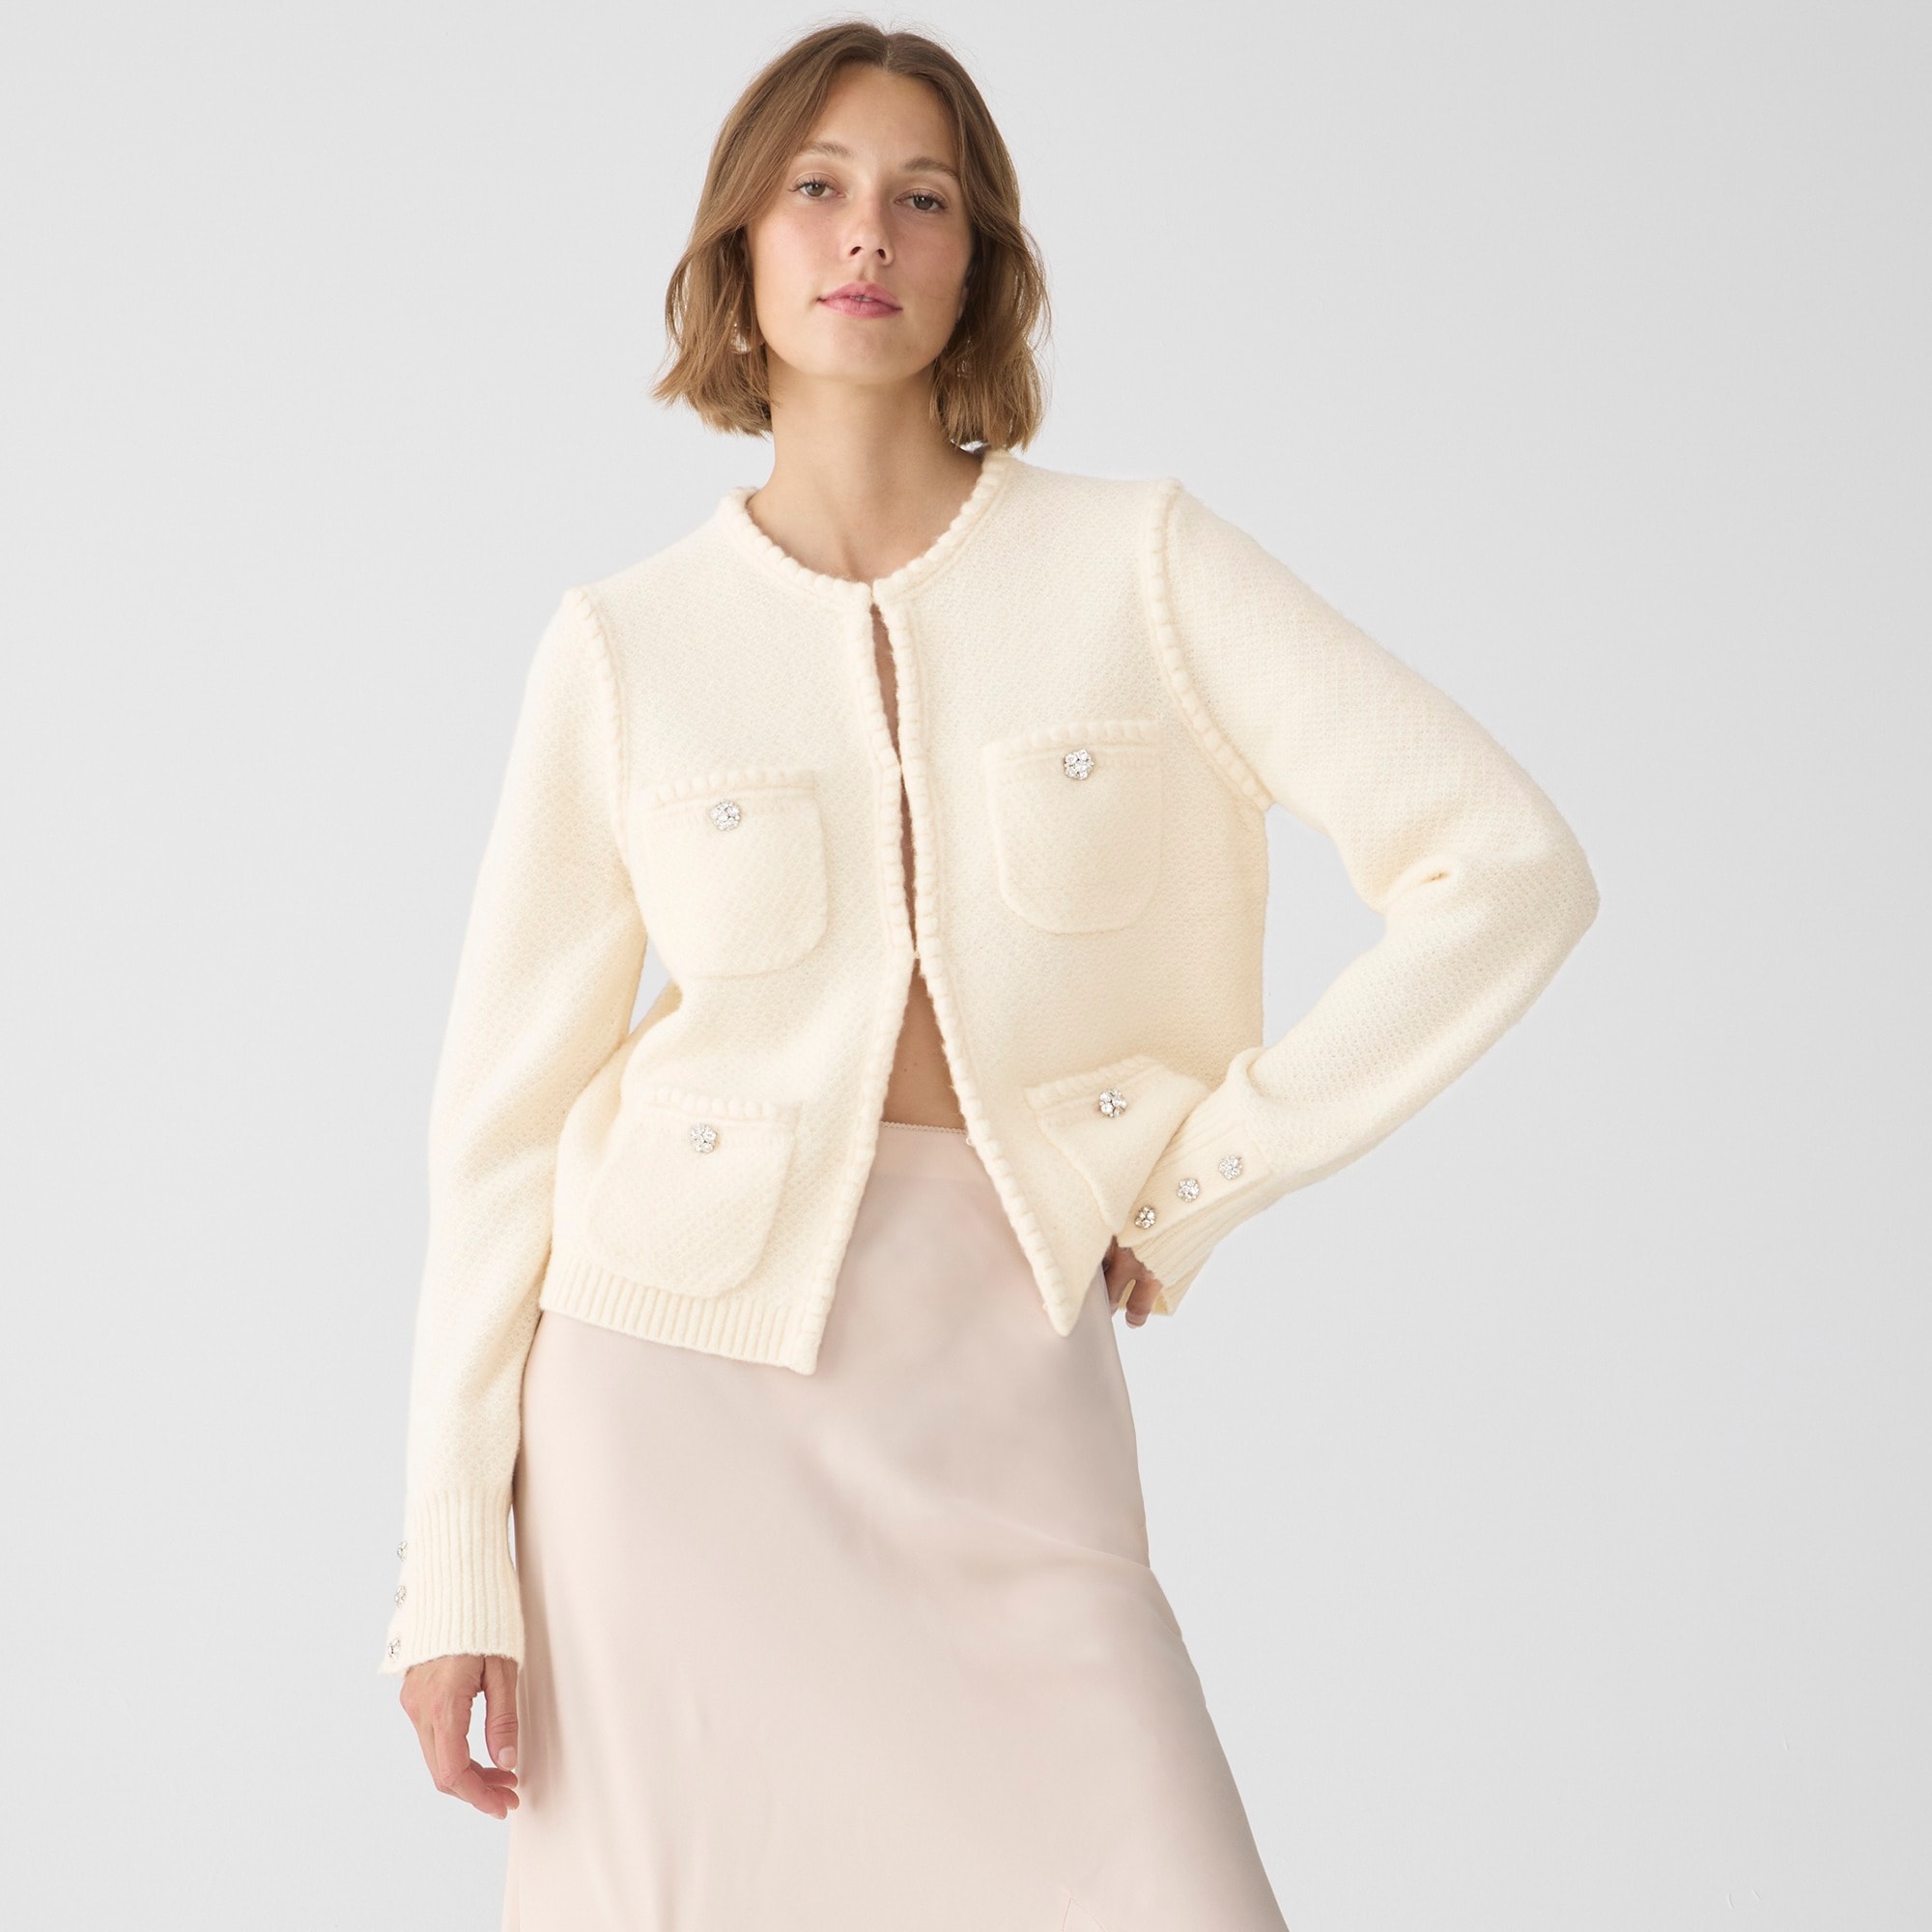 j.crew: odette sweater lady jacket with jewel buttons for women